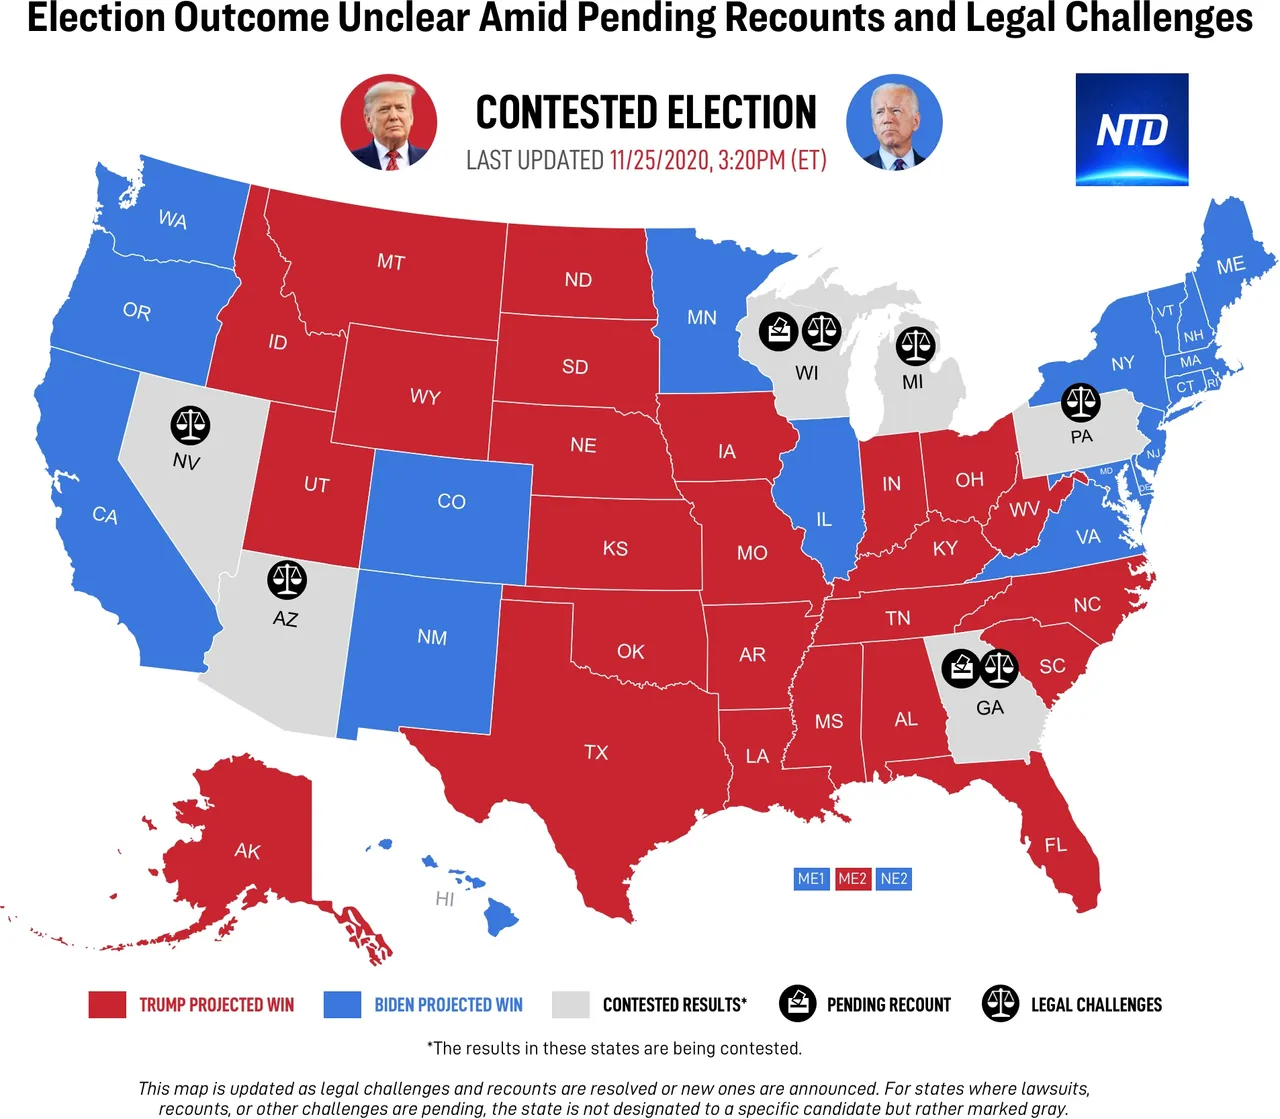 NTD Reports this is the Election Map